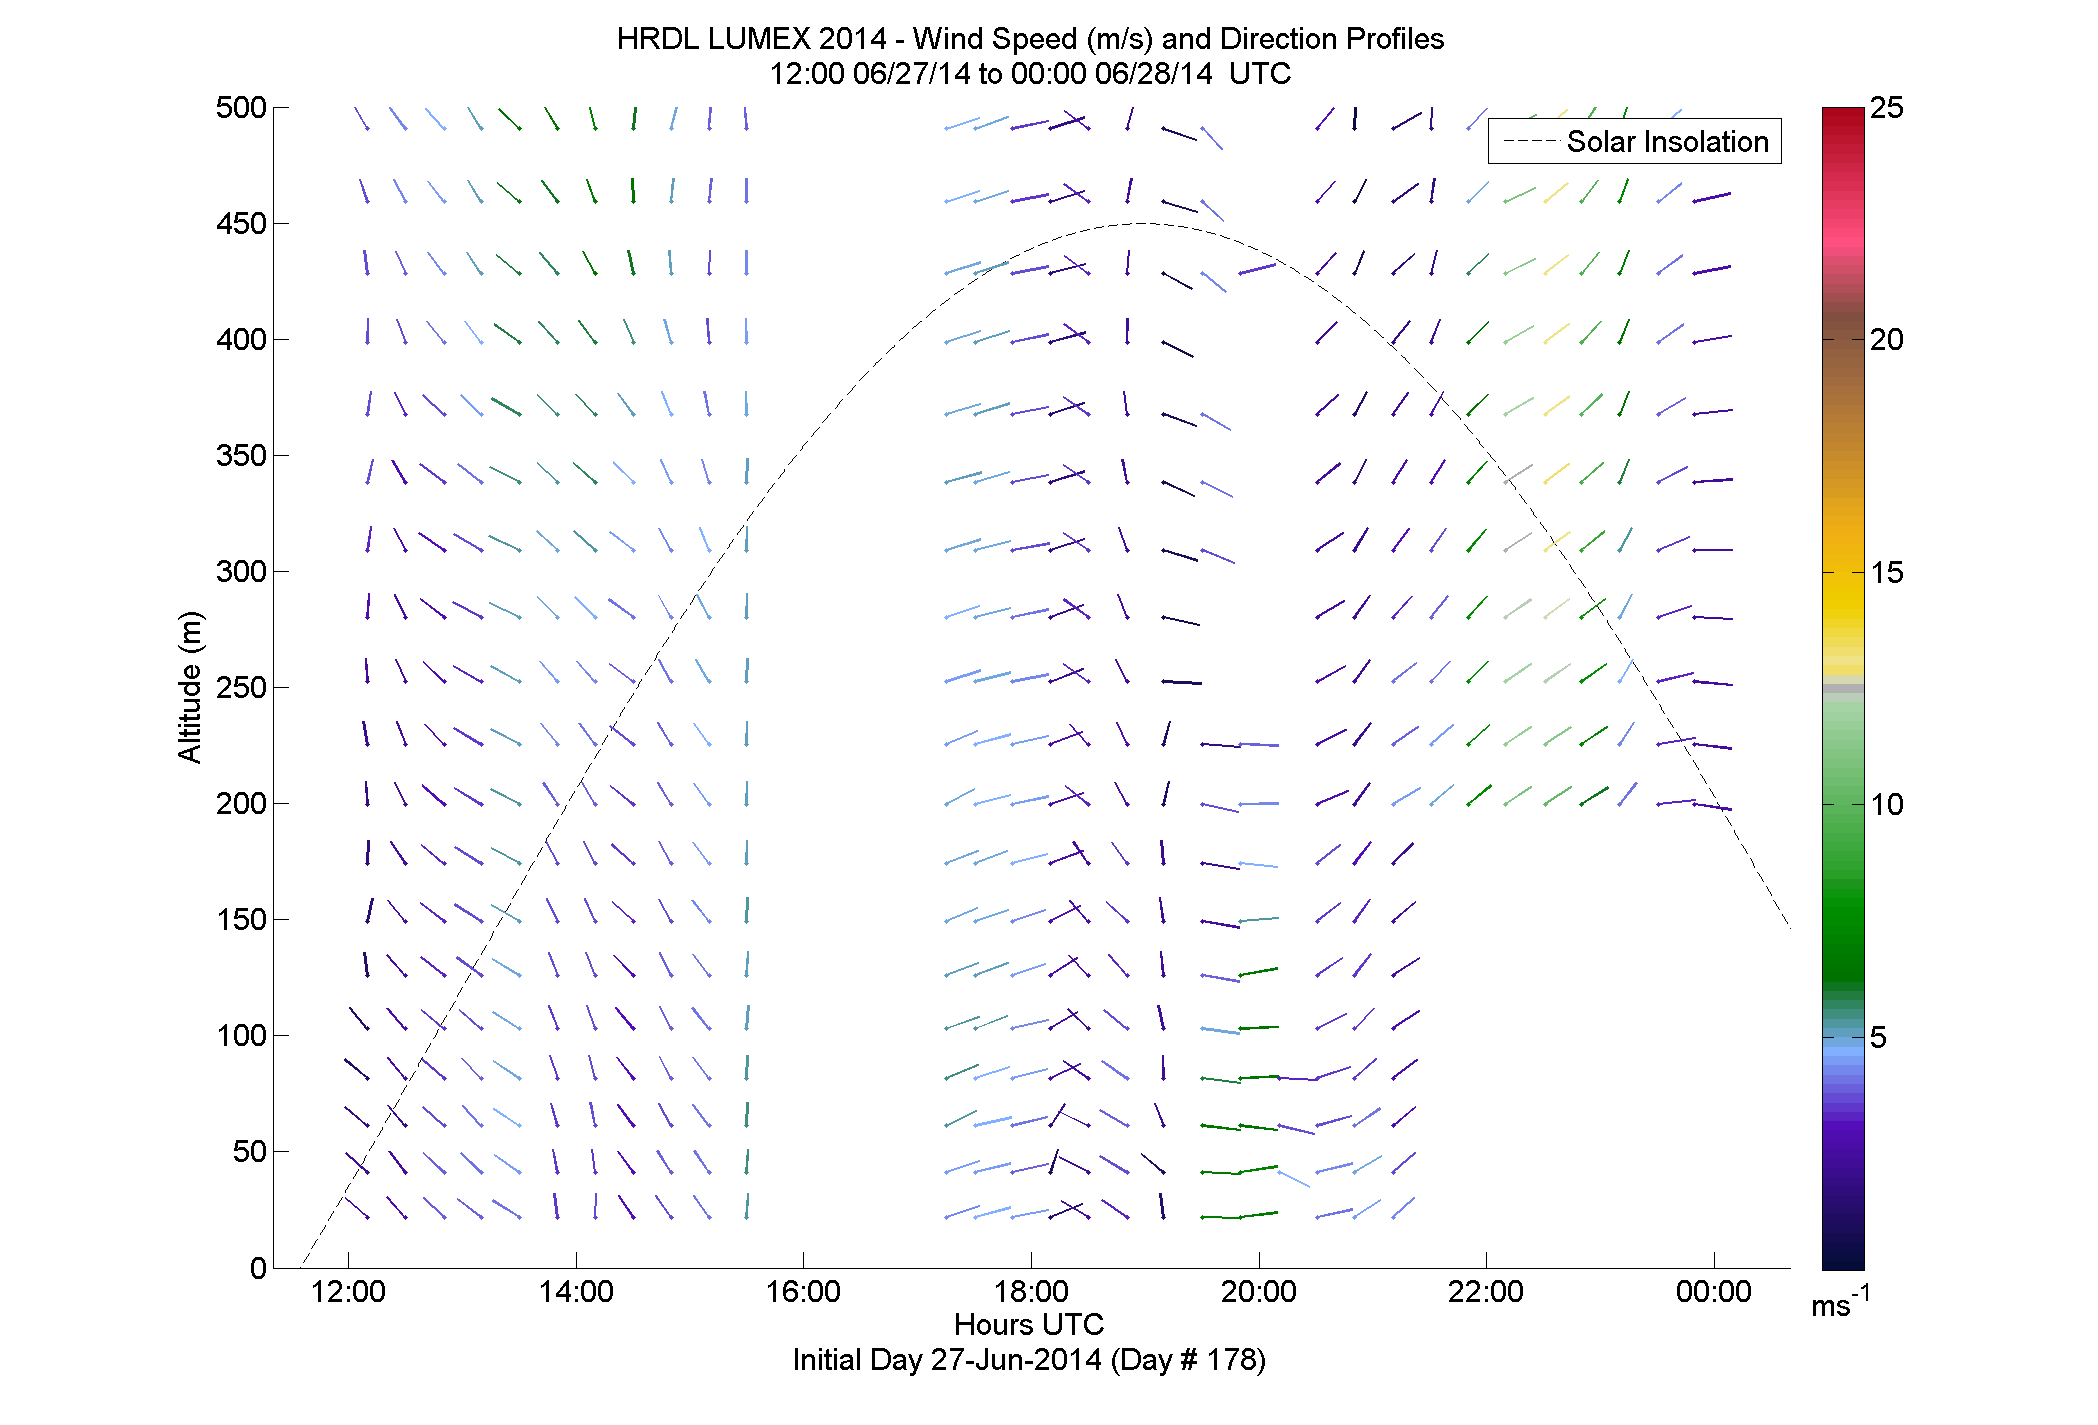 HRDL speed and direction profile - June 27 pm